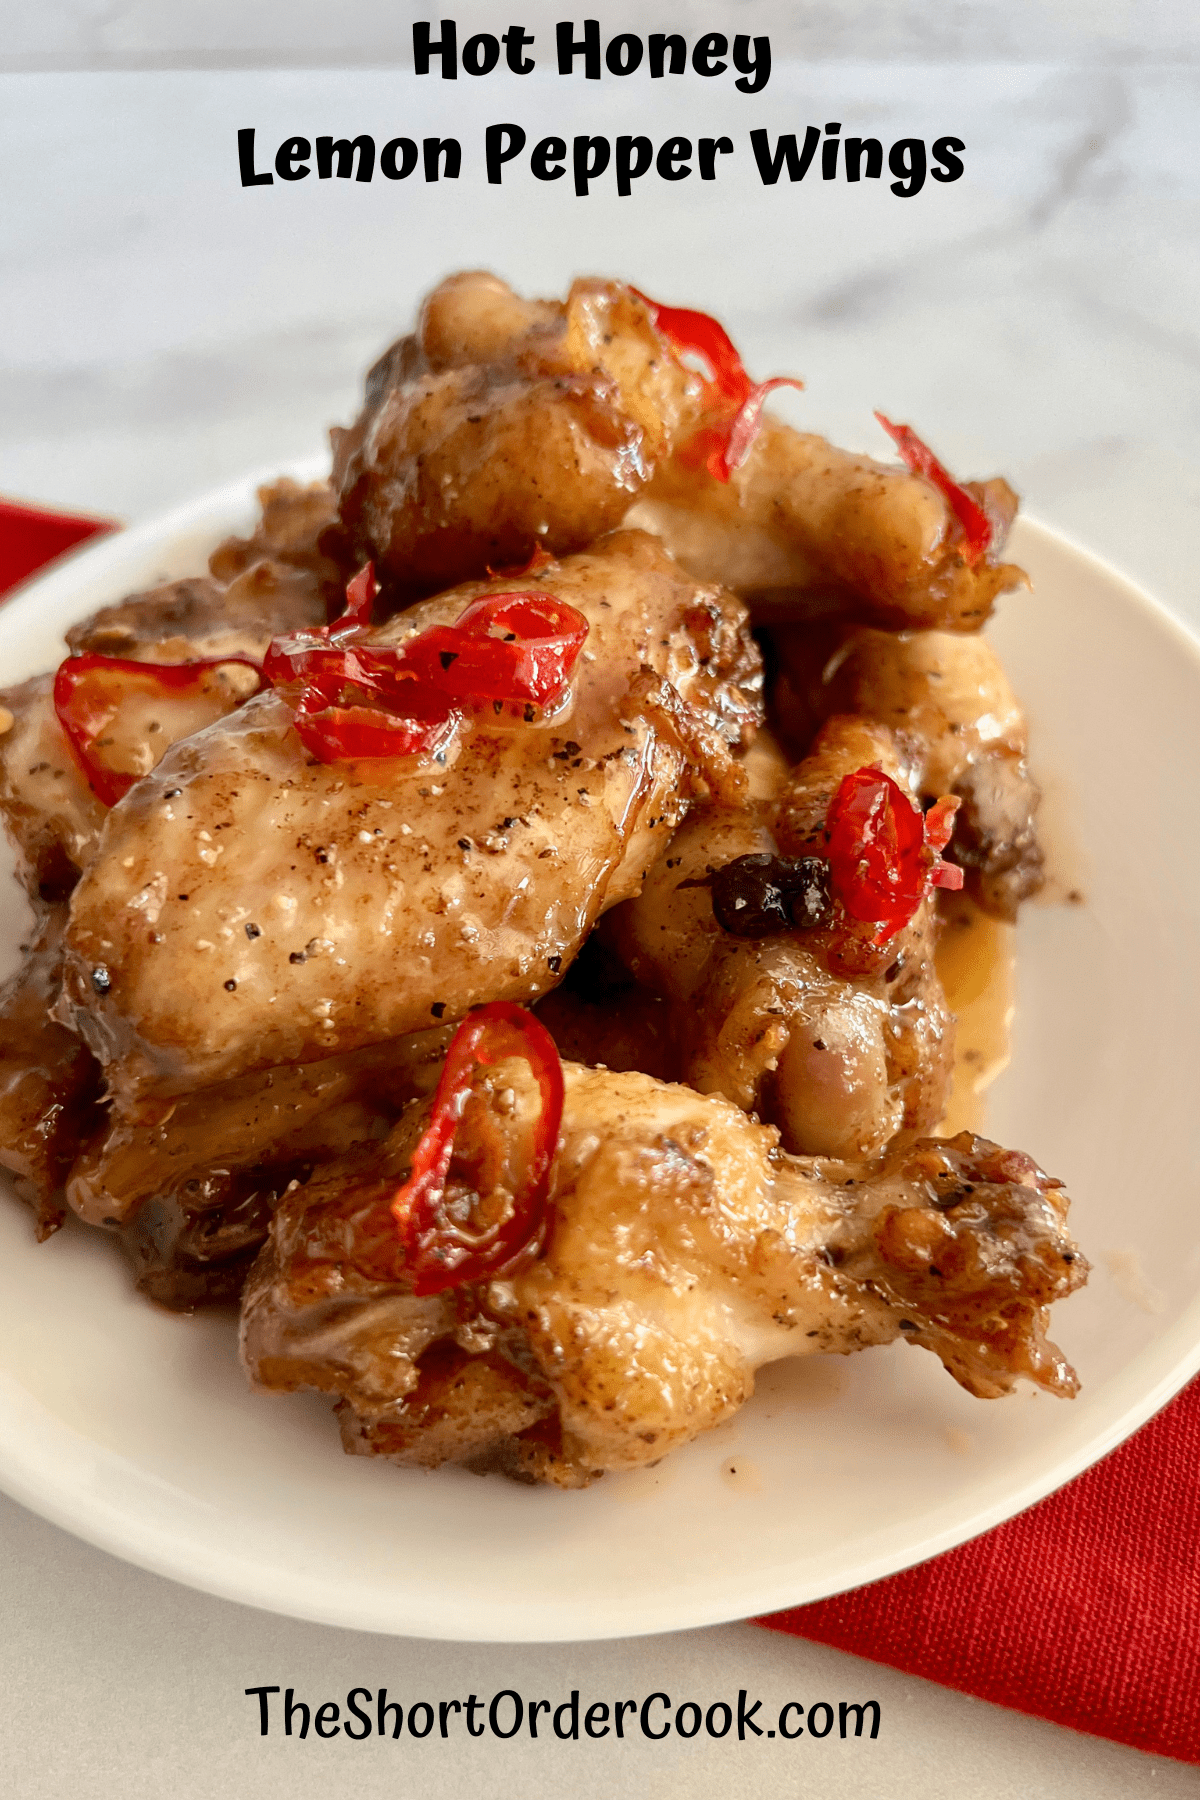 Hot Honey Lemon Pepper Wings piled on a plate with slices of red hot peppers on top.